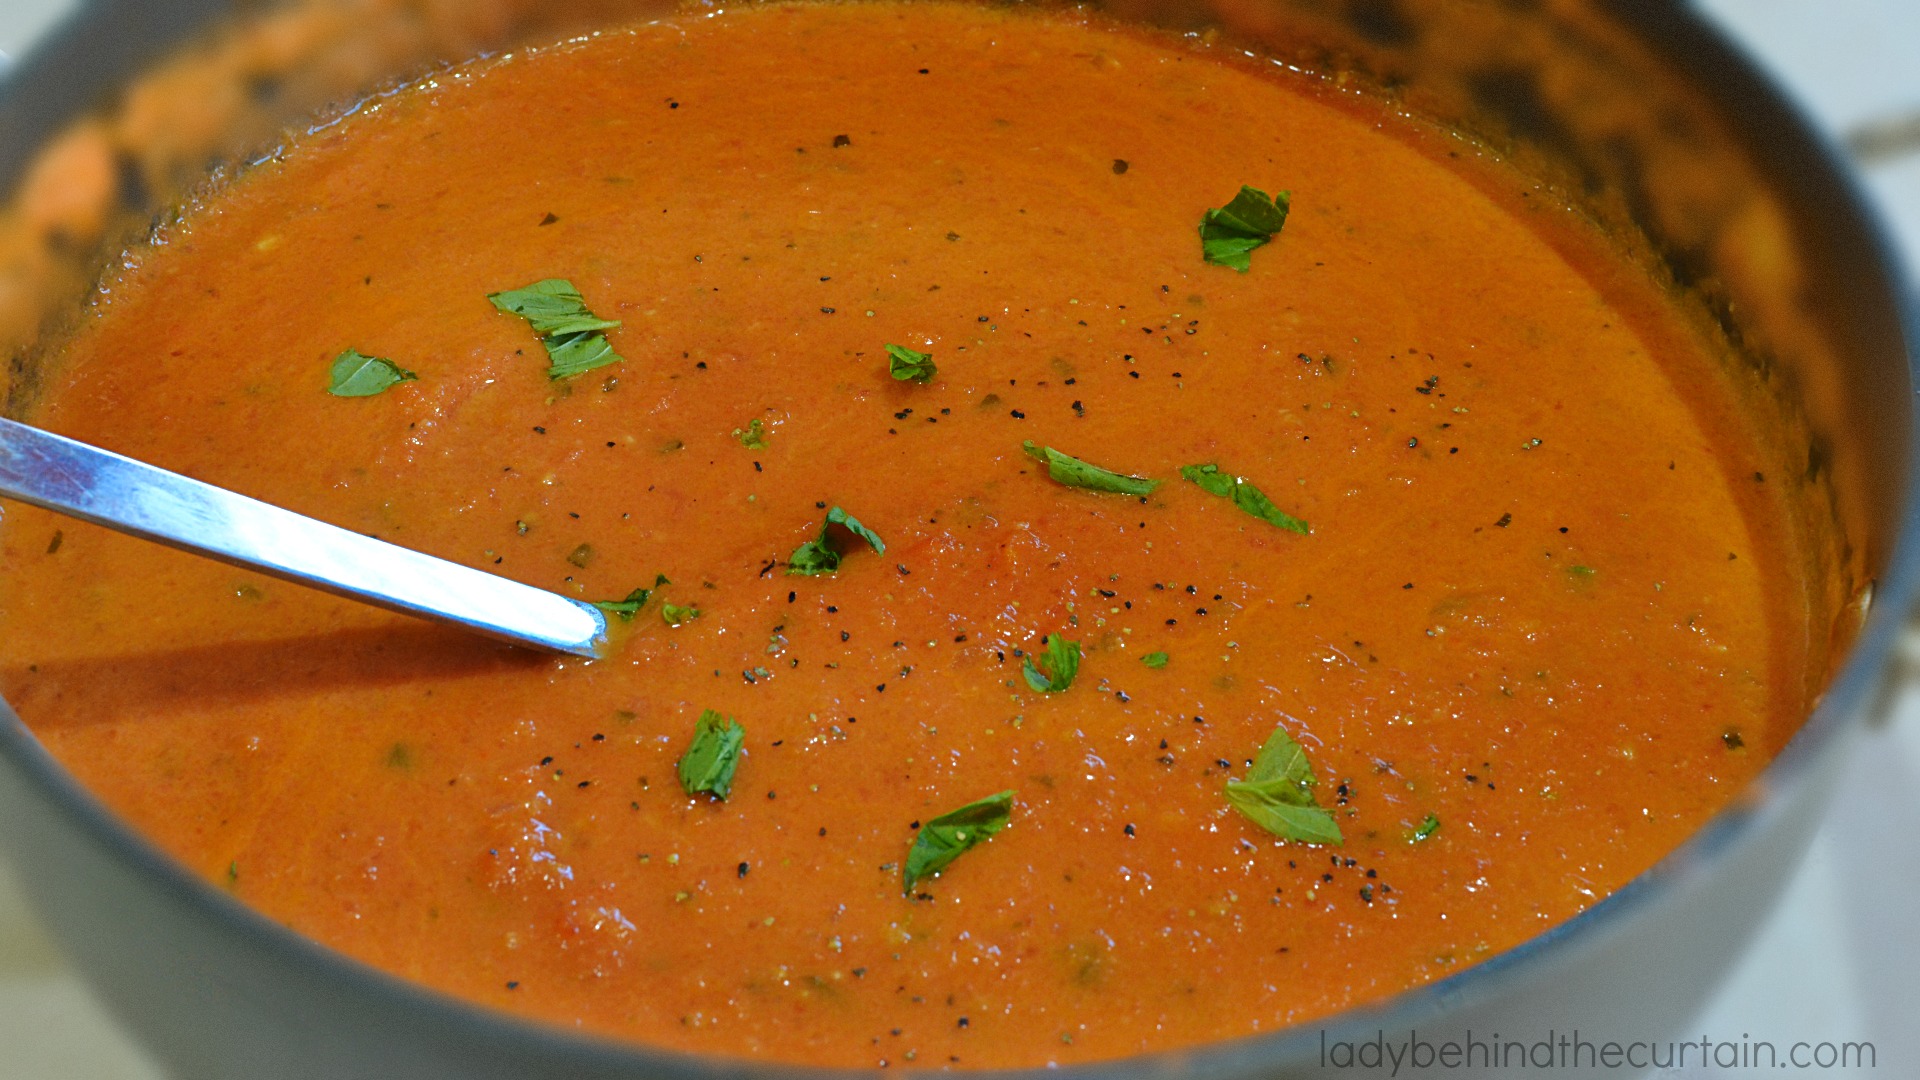 Creamy Vodka Sauce | A flavorful sauce that goes beautifully with your favorite pasta, chicken or seafood.